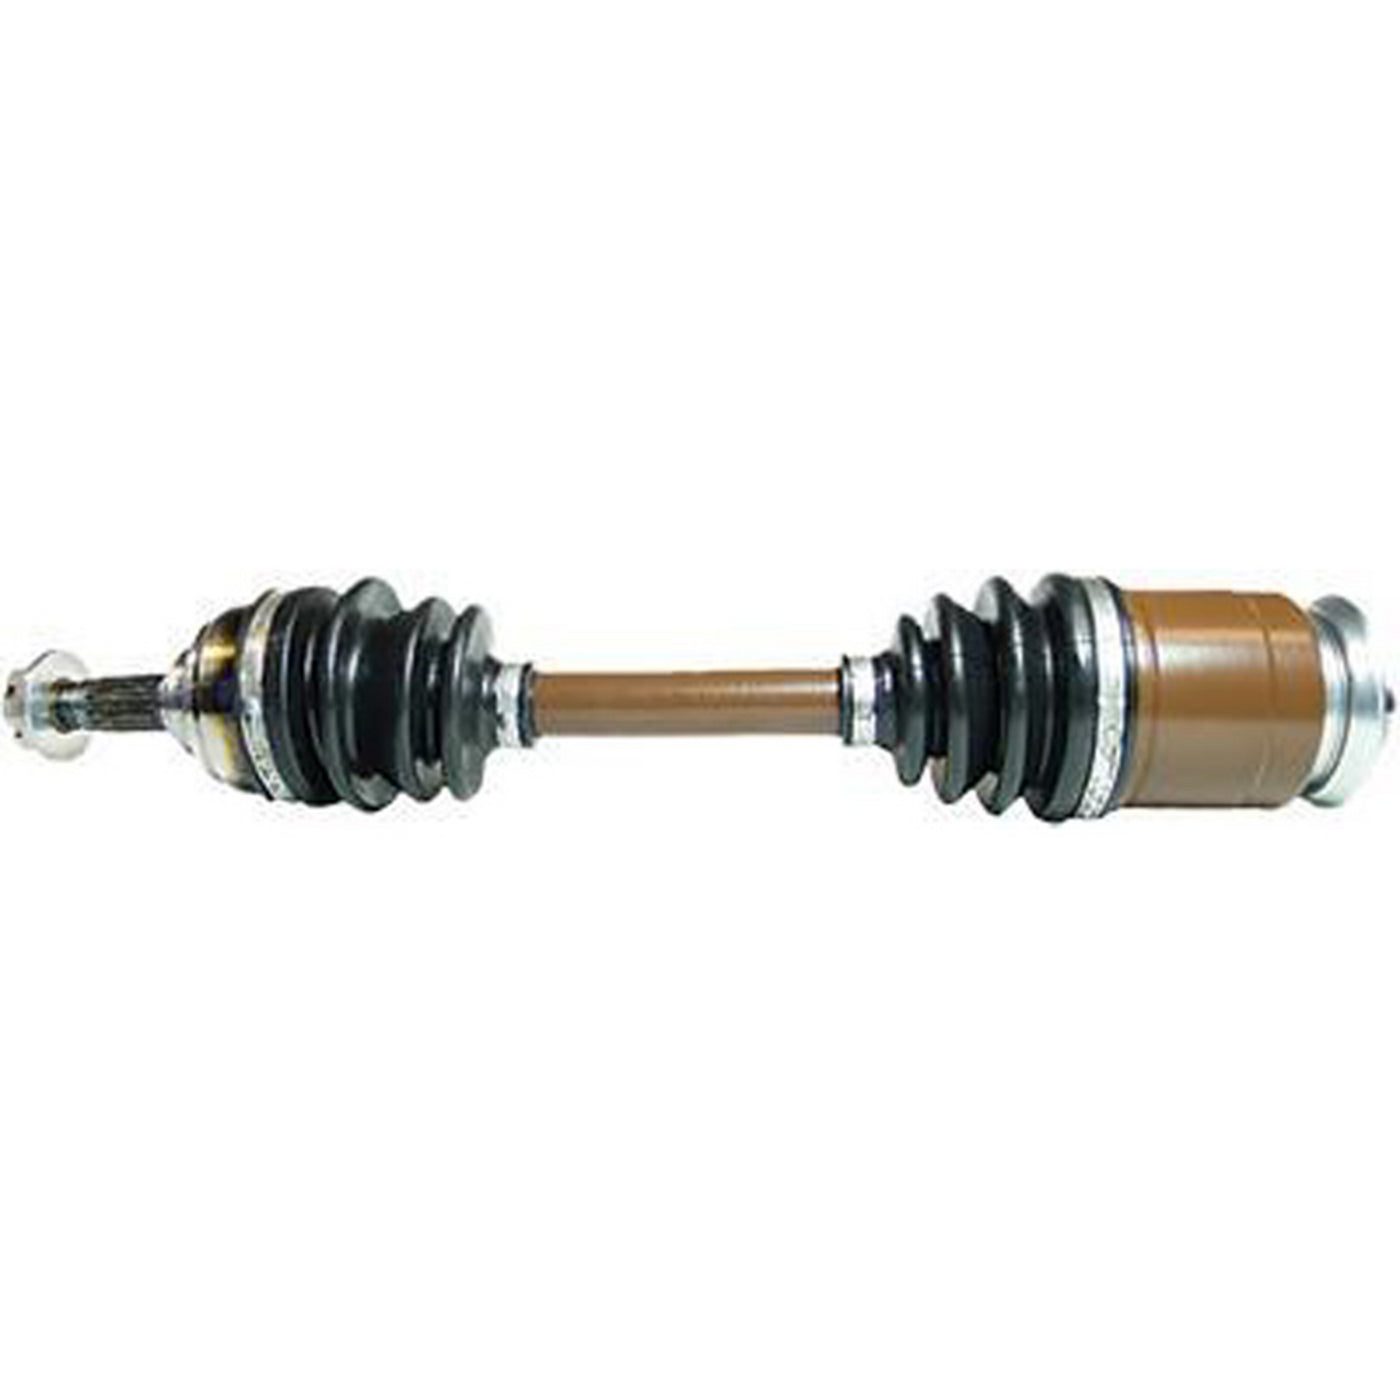 All Balls Racing AB6-CA-8-113 Can-Am Complete CV Axle #AB6-CA-8-113